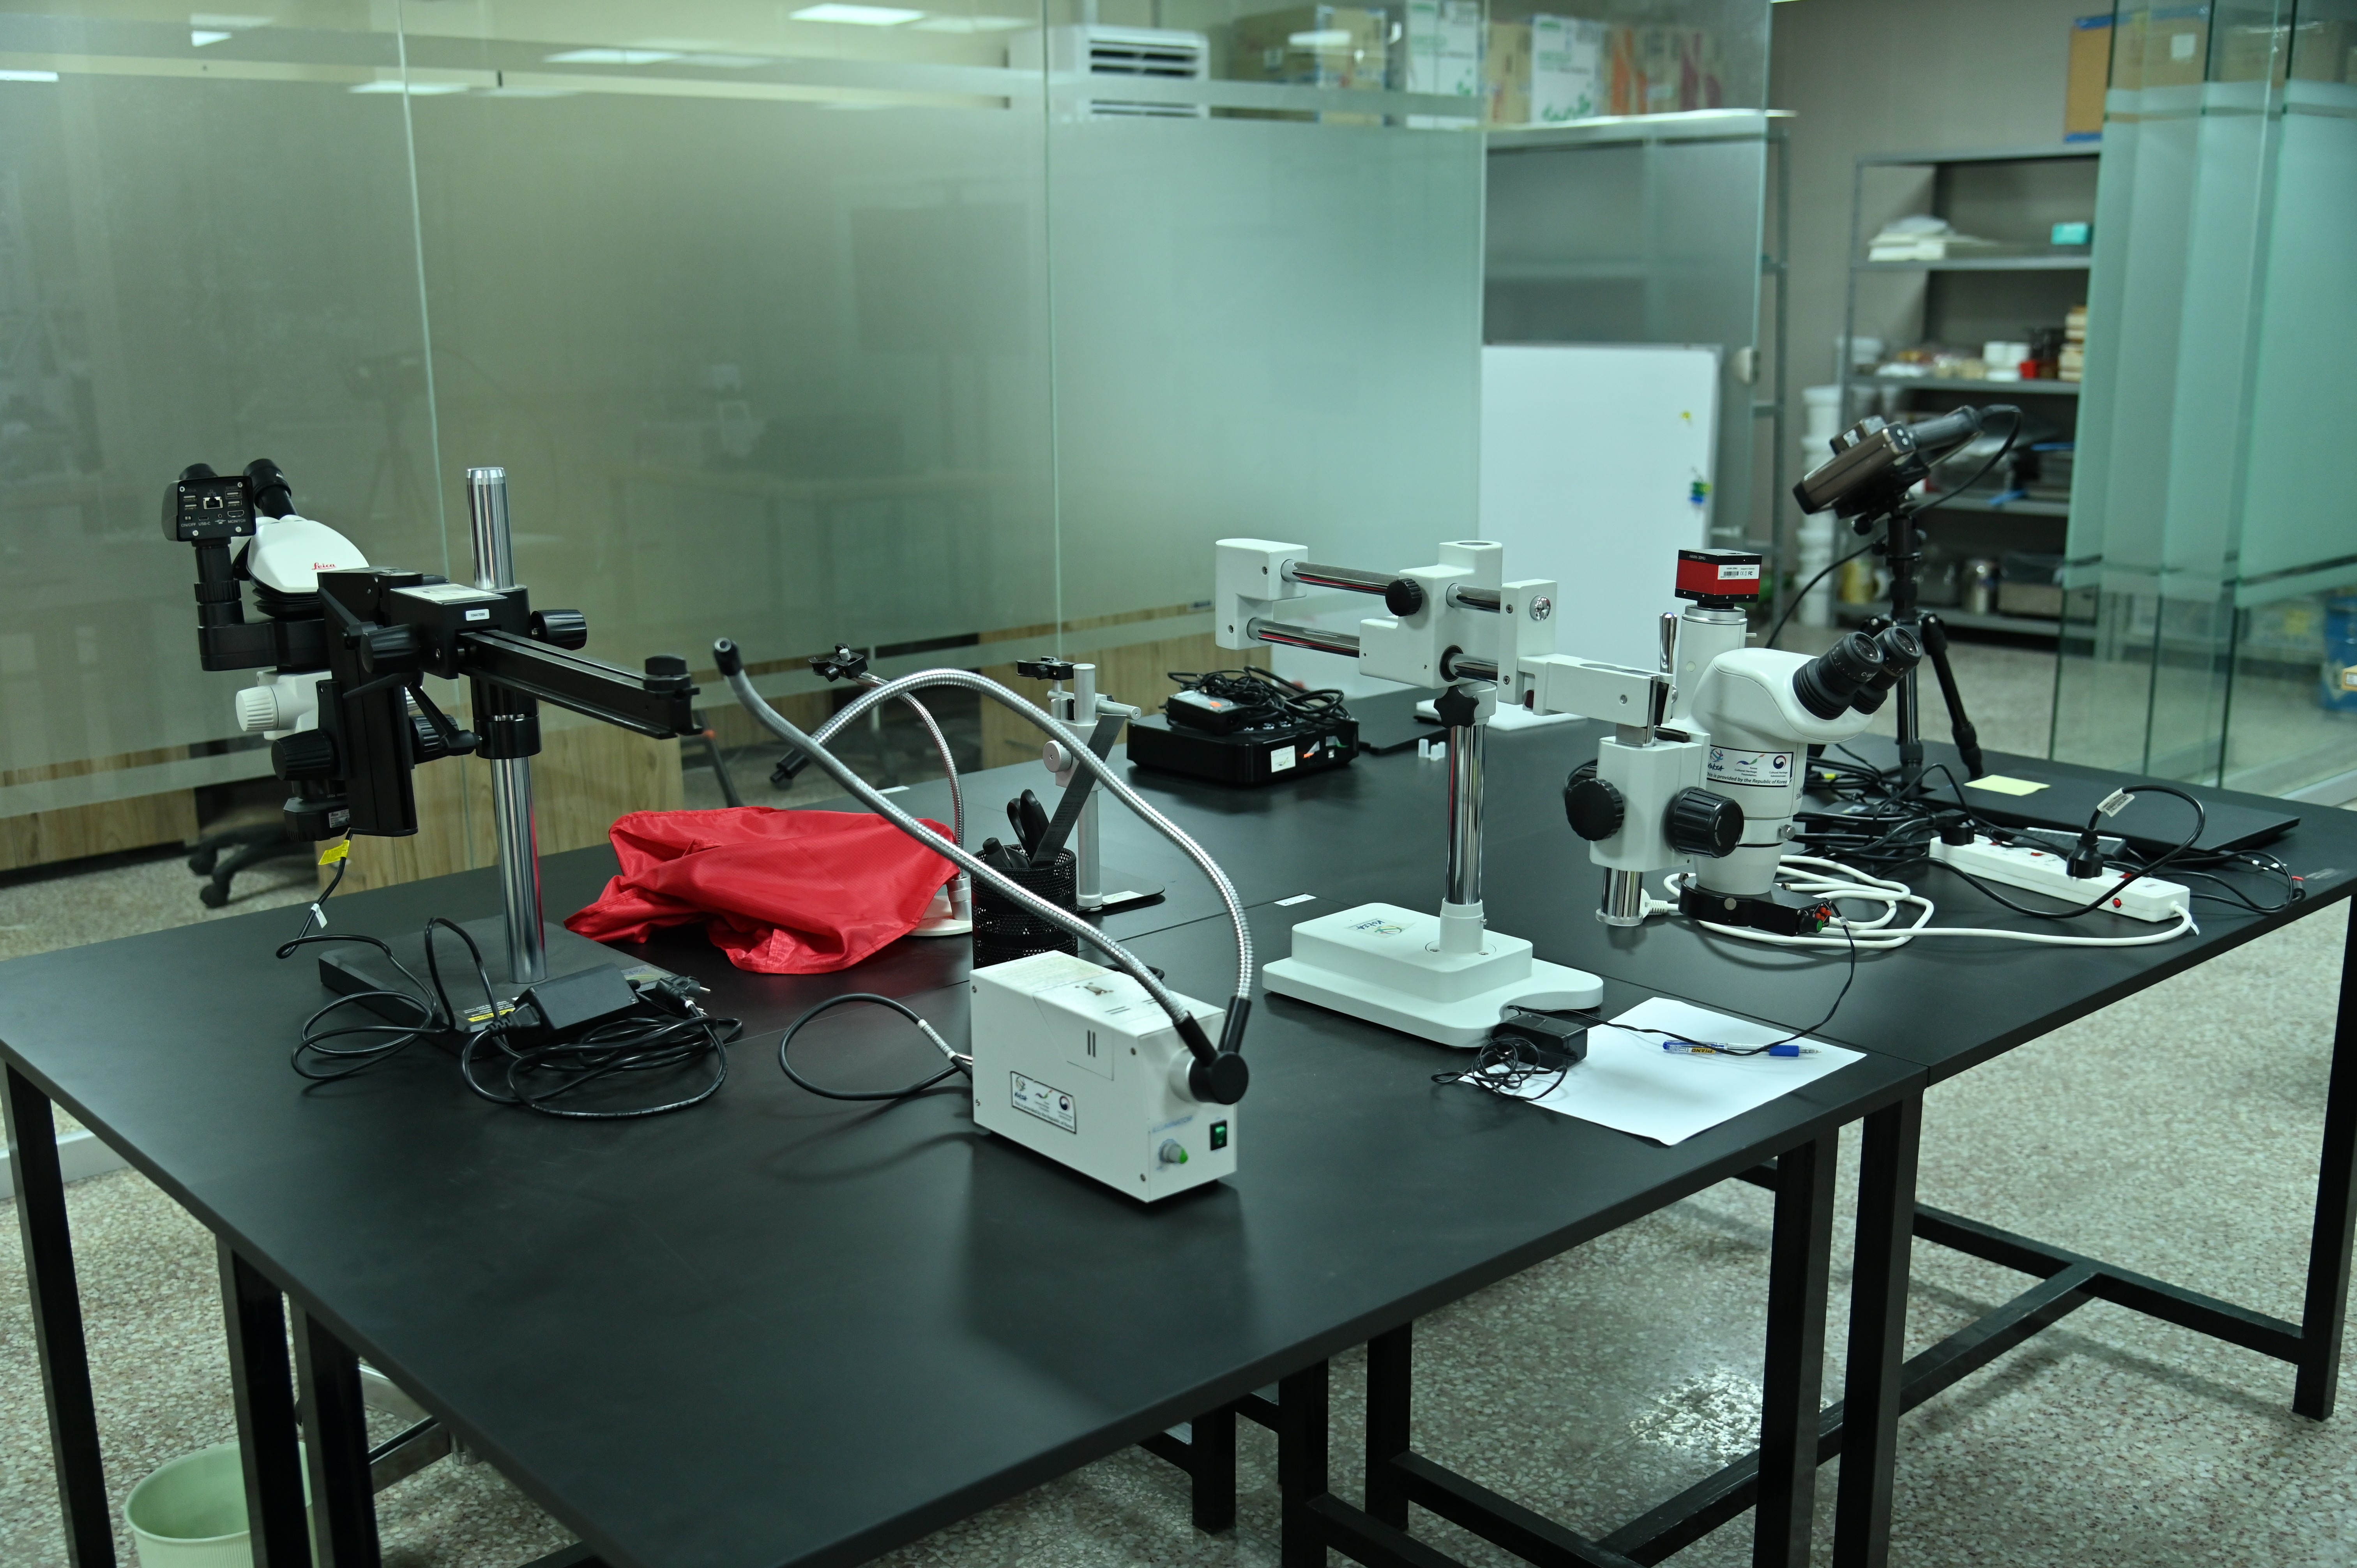 The microscopes used to take the pictures and to magnify the artifacts